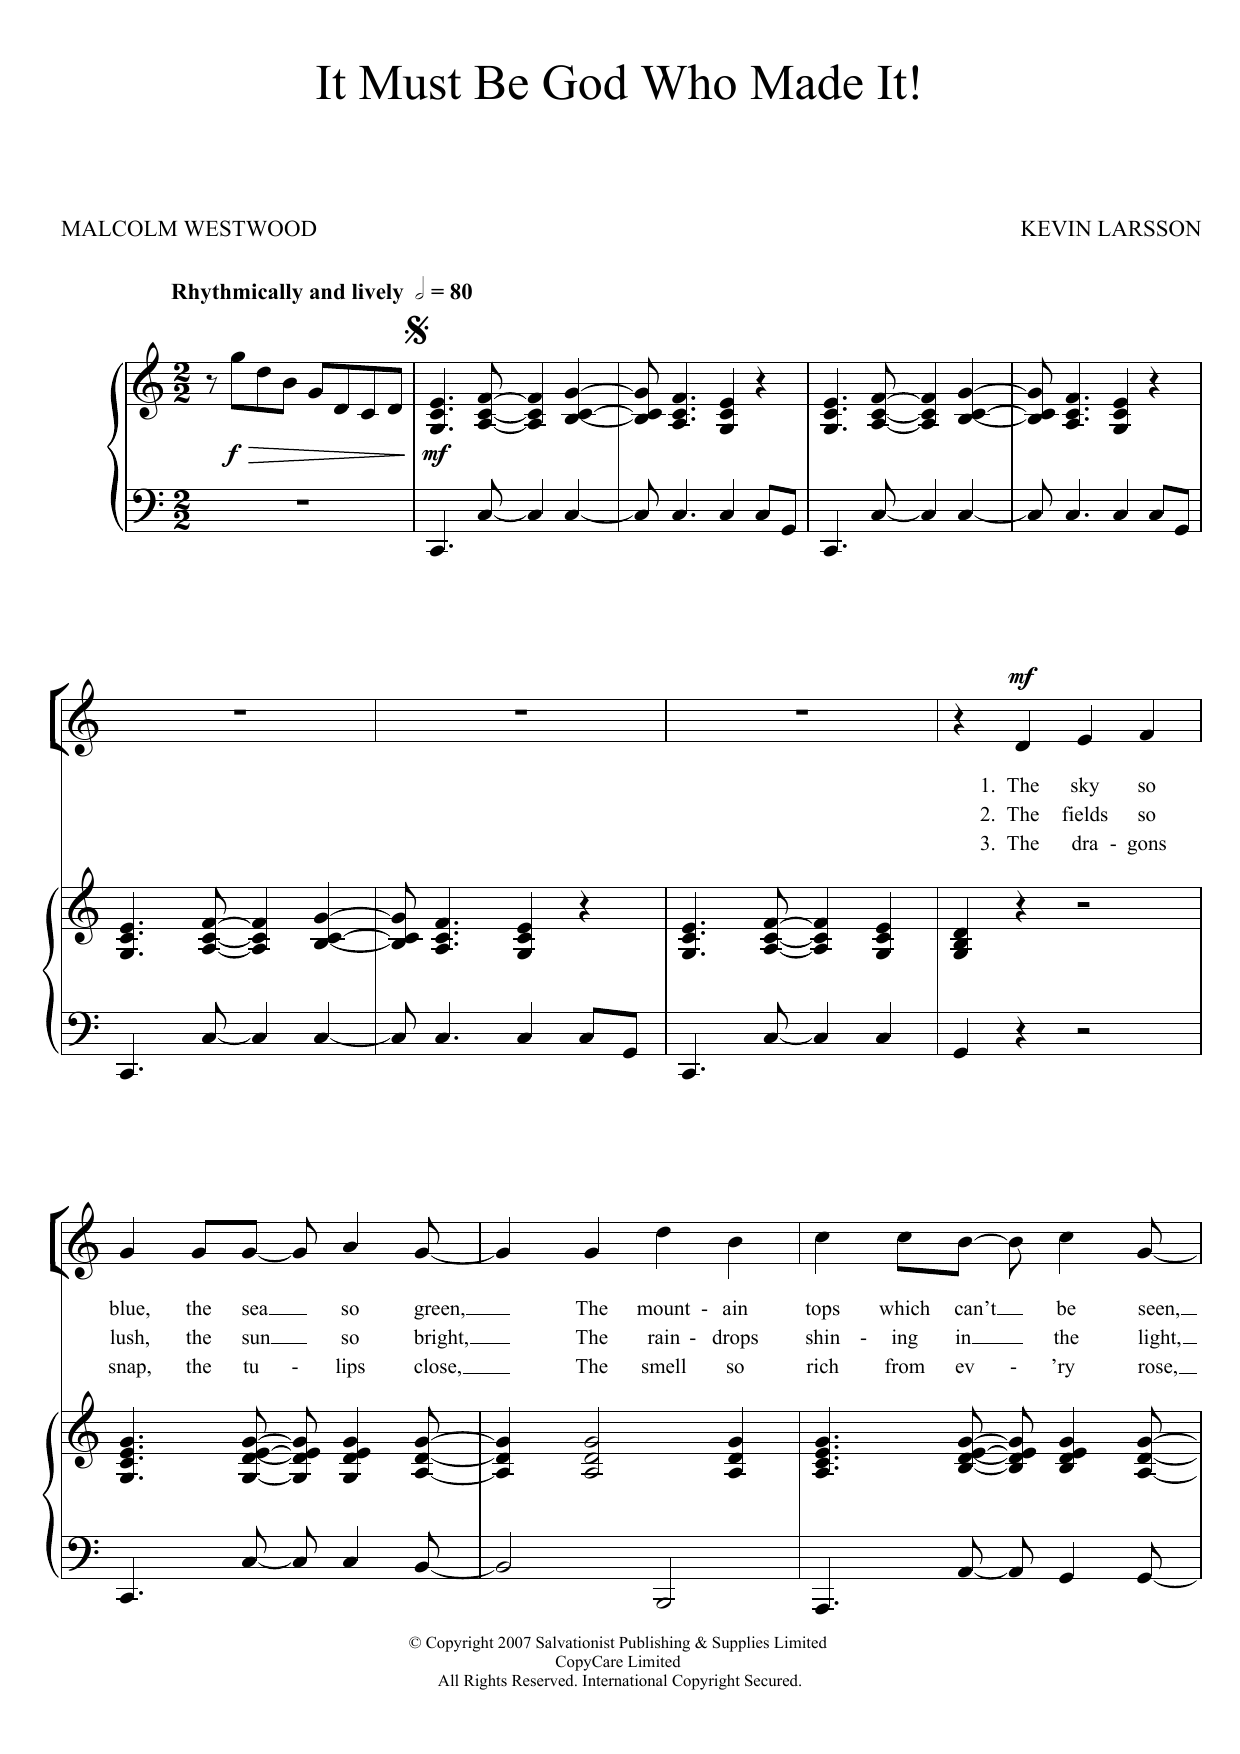 Download The Salvation Army It Must Be God Who Made It Sheet Music